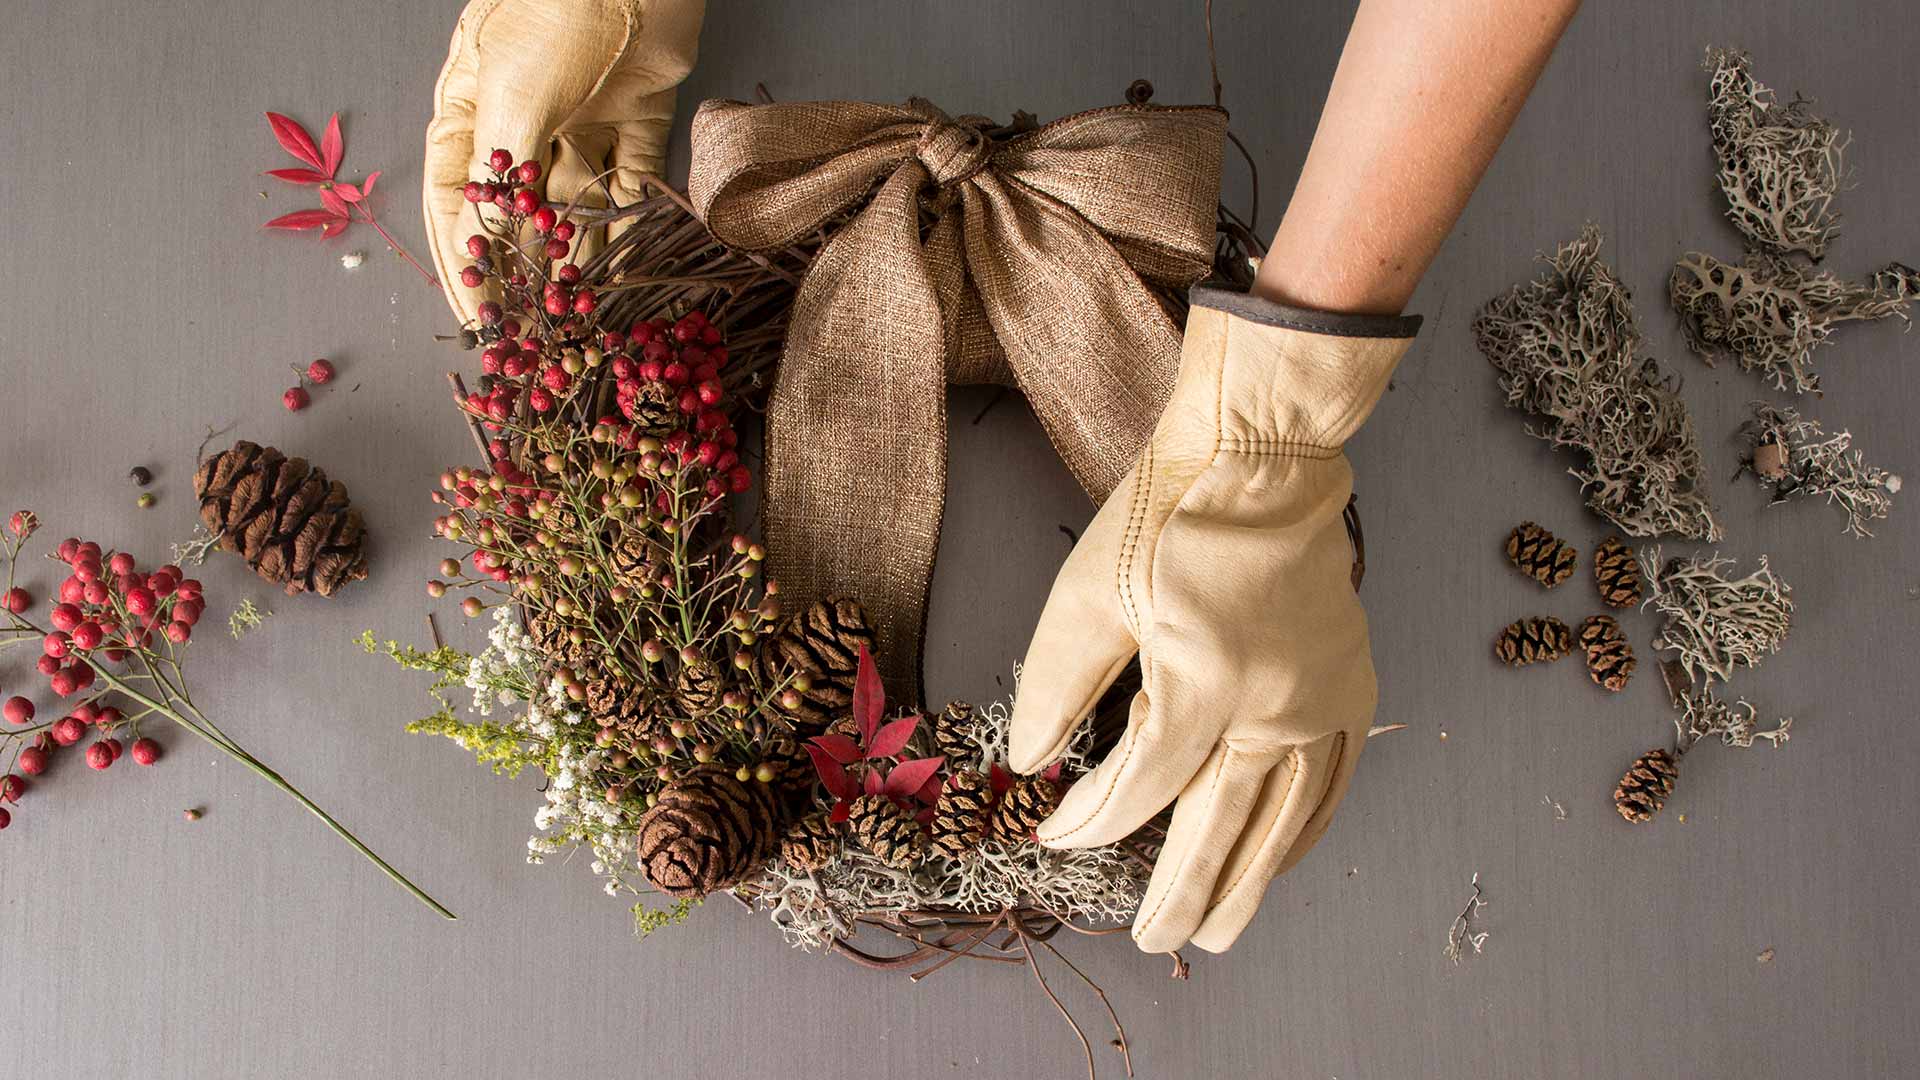 How To Make Your Own Fall Grapevine Wreath